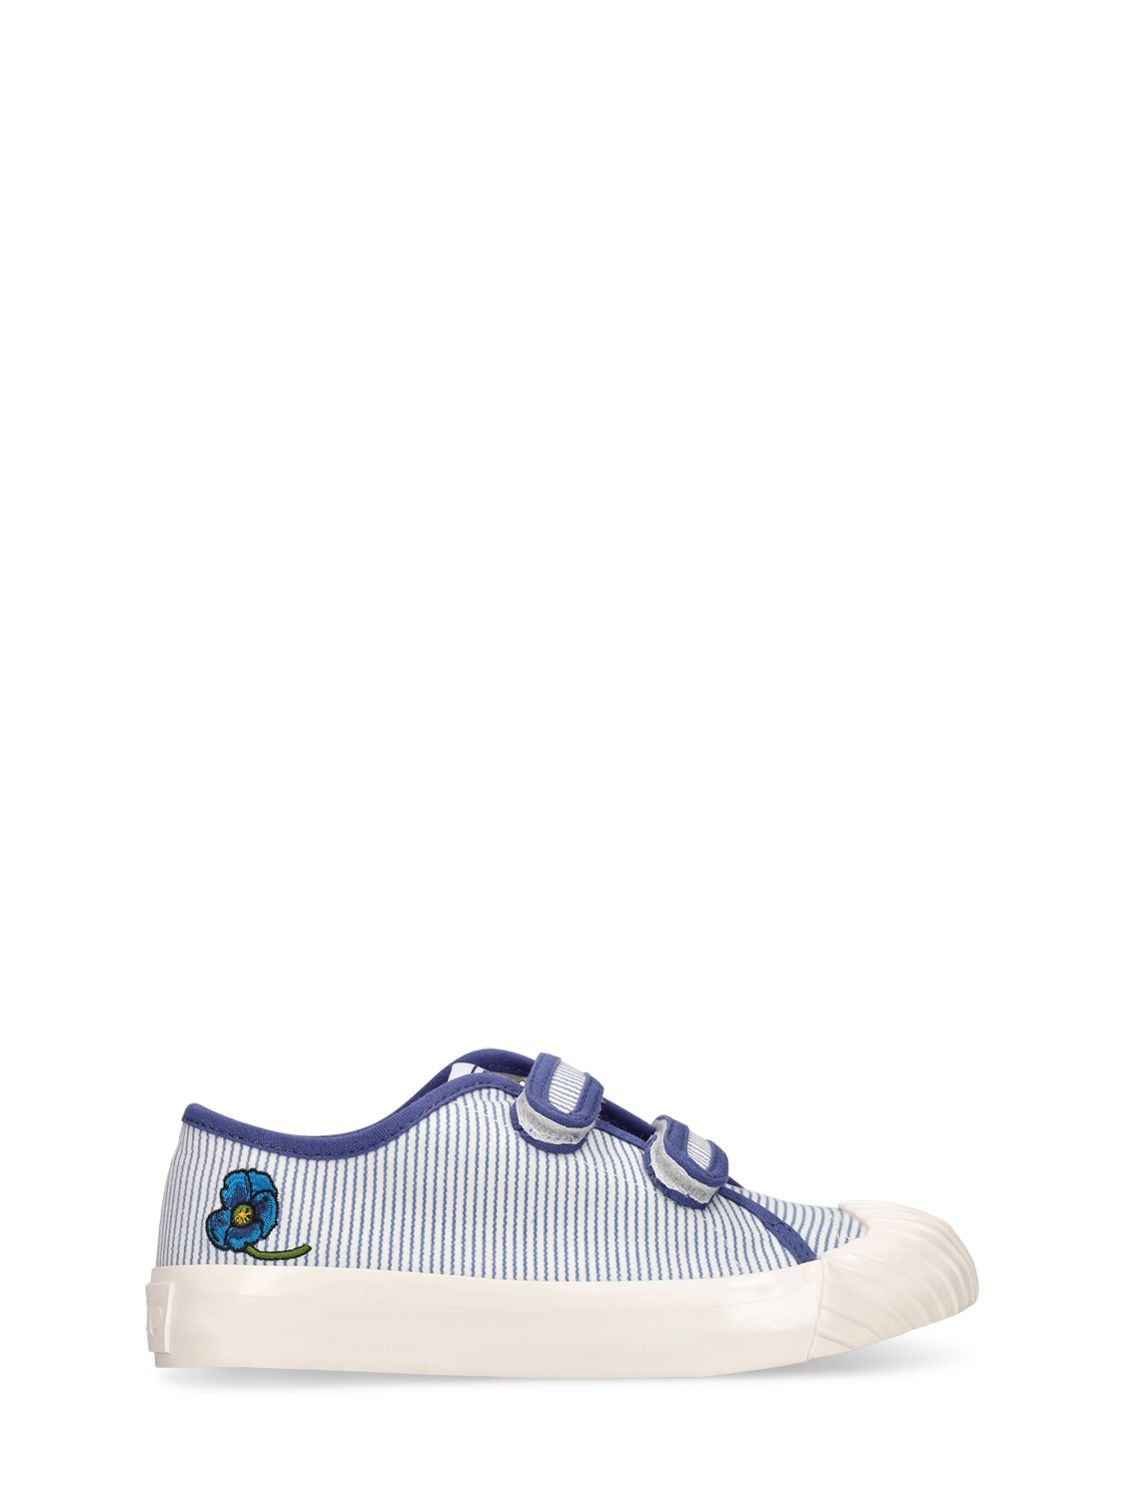 Kenzo Kids' Striped Cotton Strap Trainers In White,navyblue